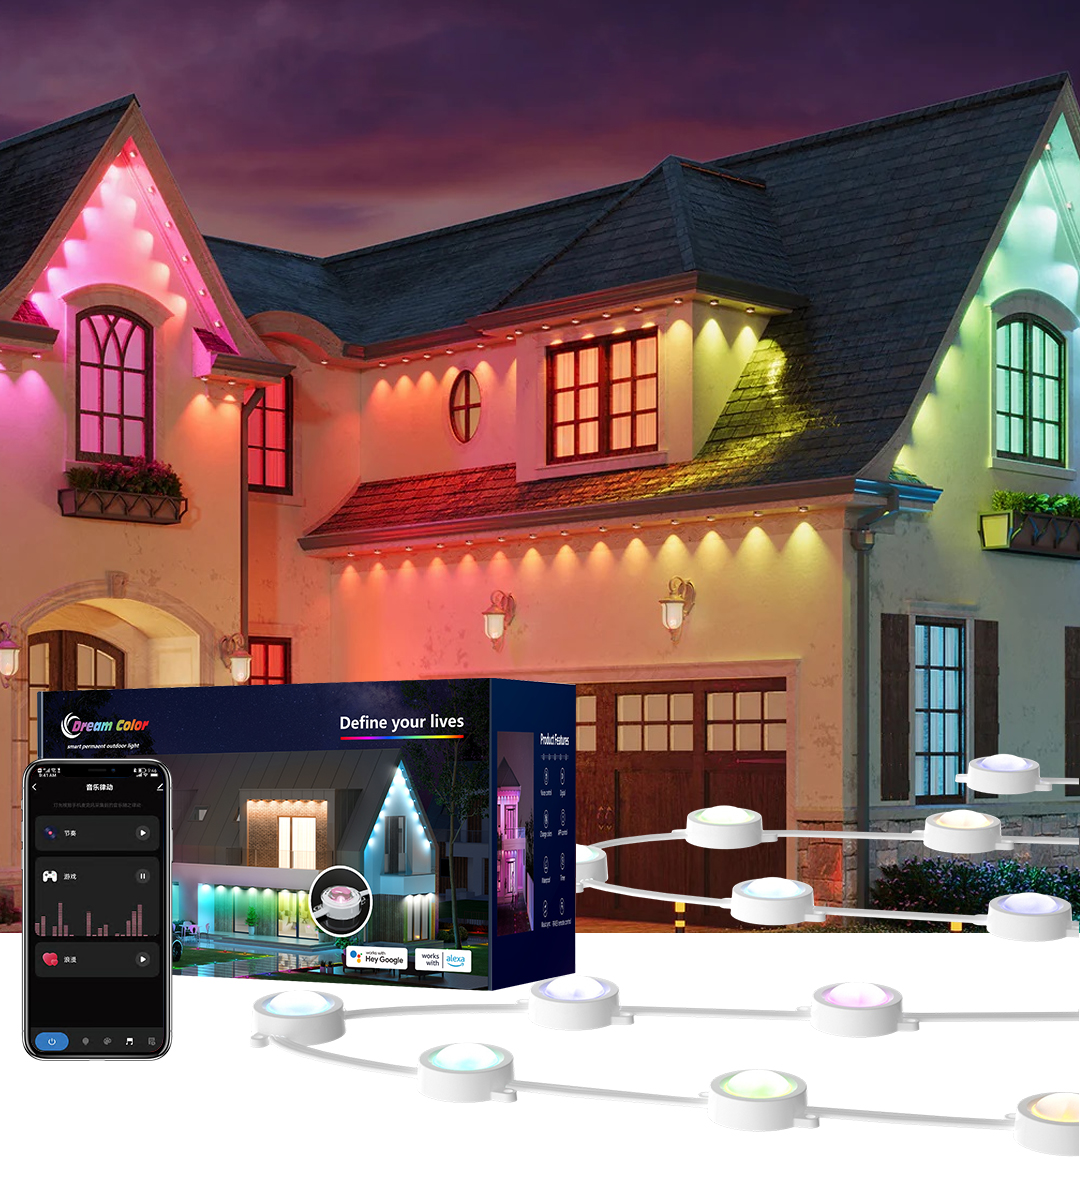 CL LIGHTING: Illuminate Your Holidays with Quality Christmas Lights